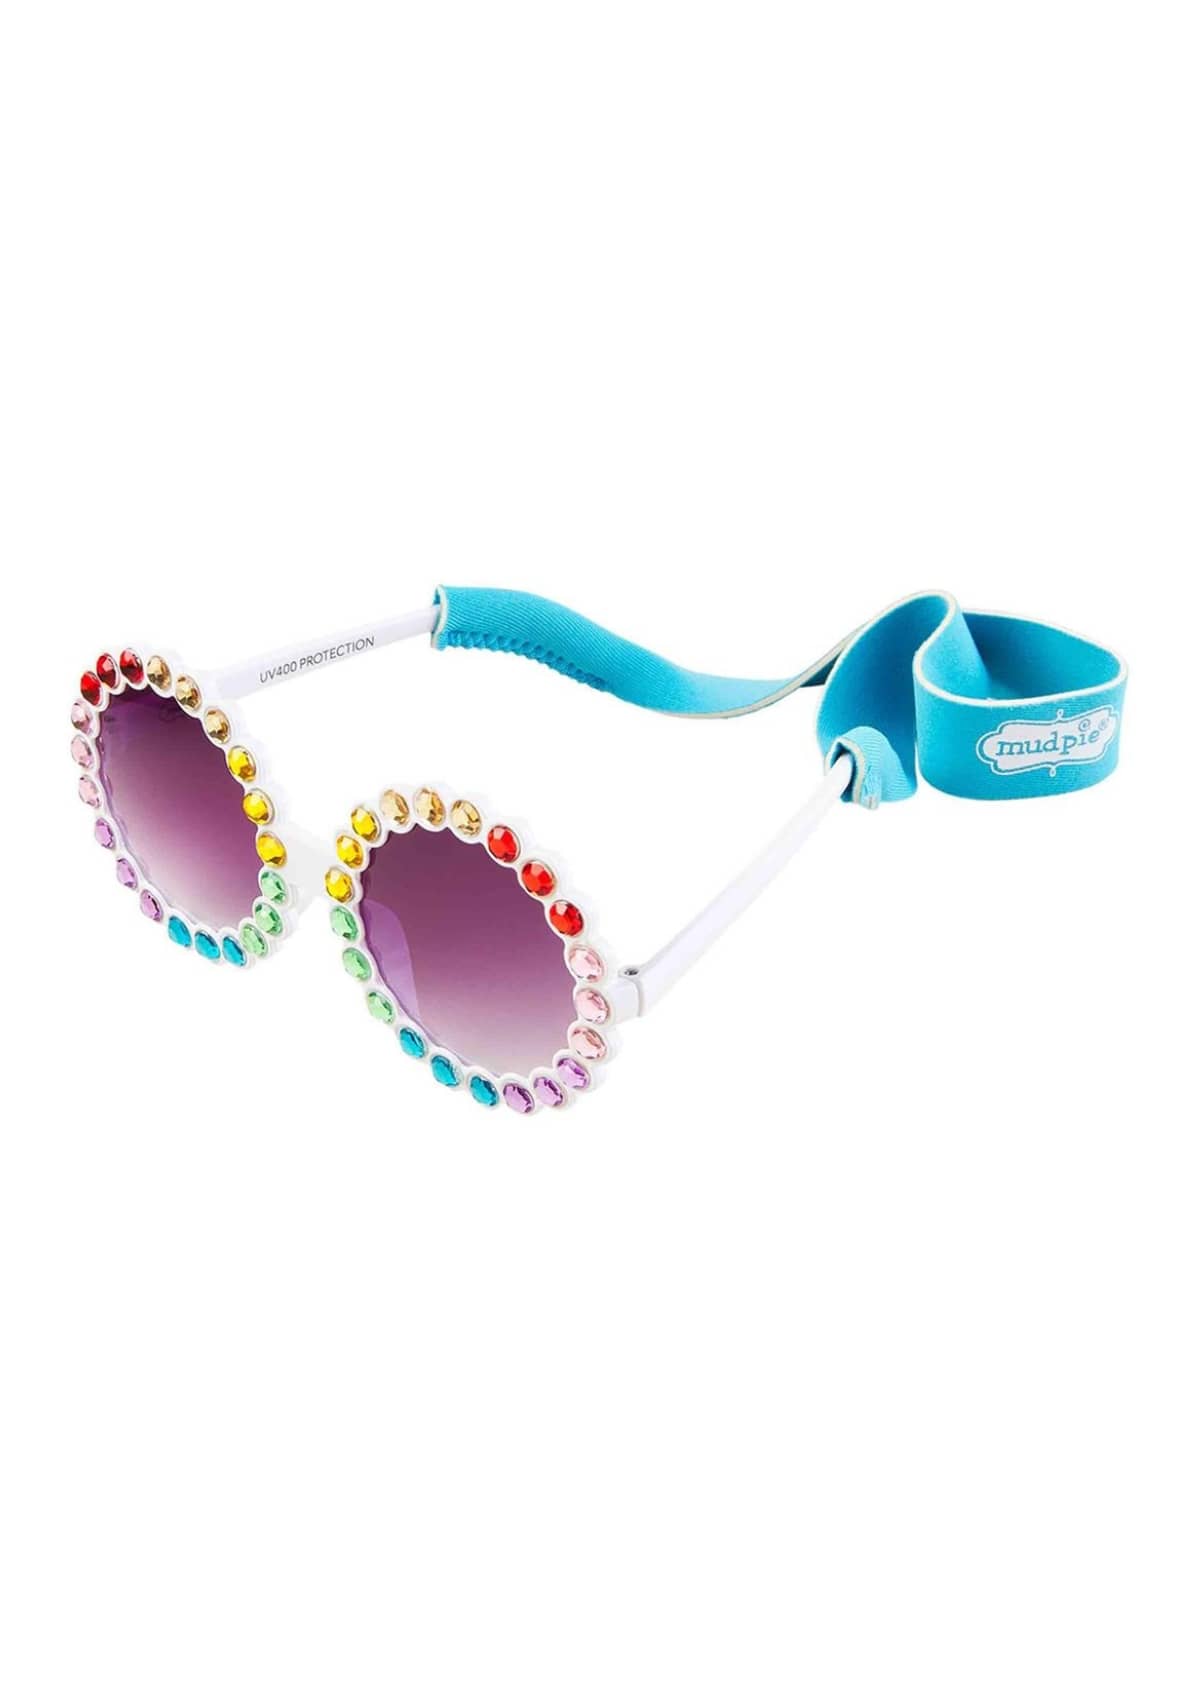 Accessories For the Littles-New Accessories For the Littles-Sunglasses For the Littles-Ruby Jane.